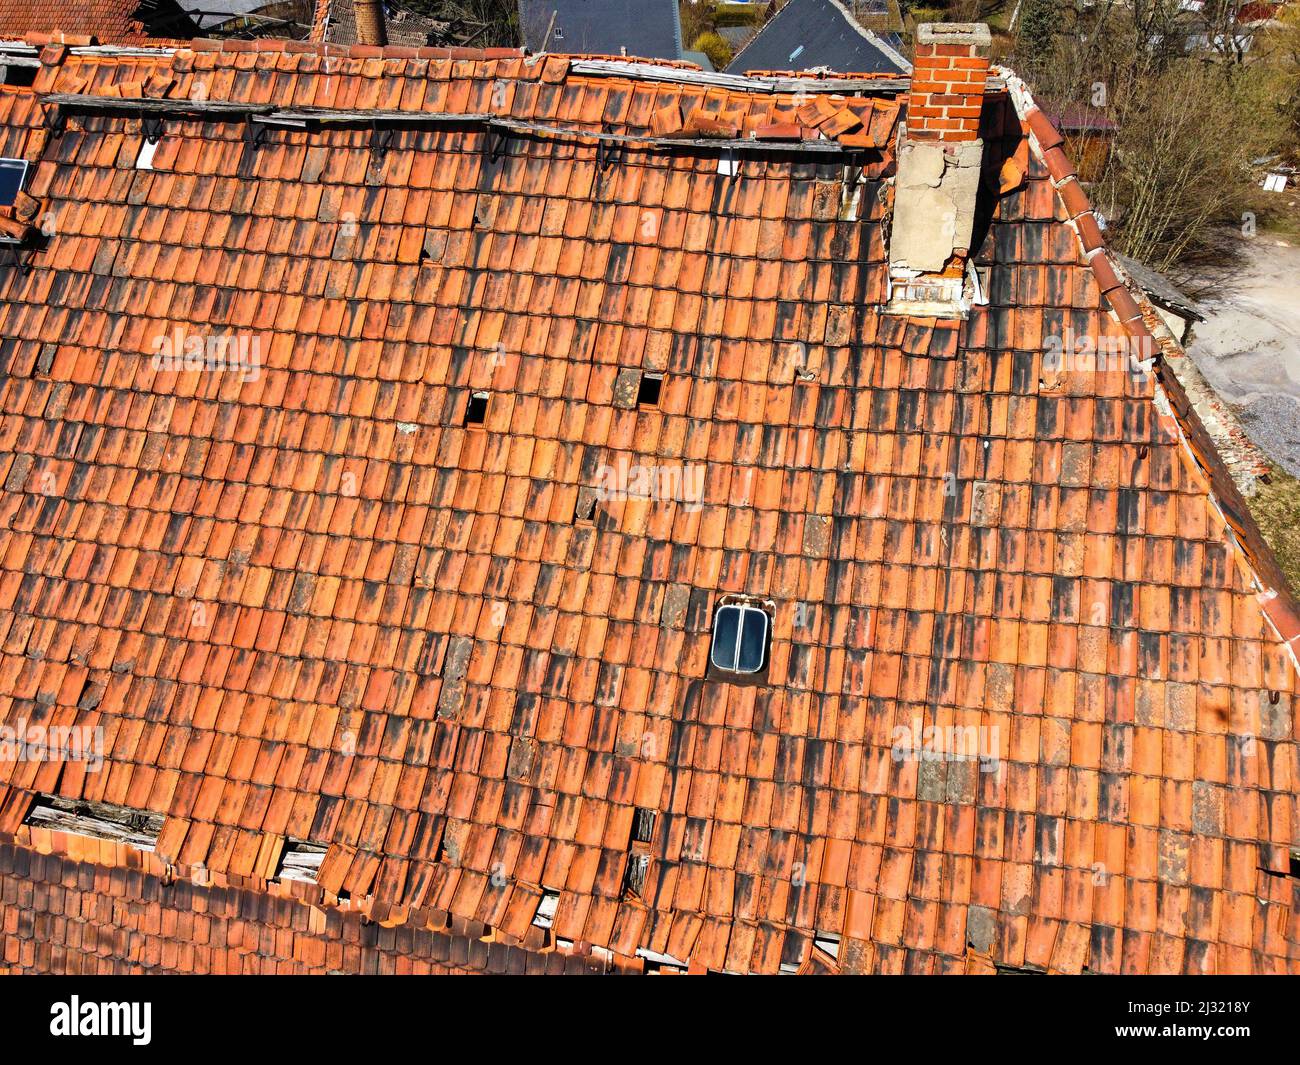 Renovation of an old tiled roof Stock Photo